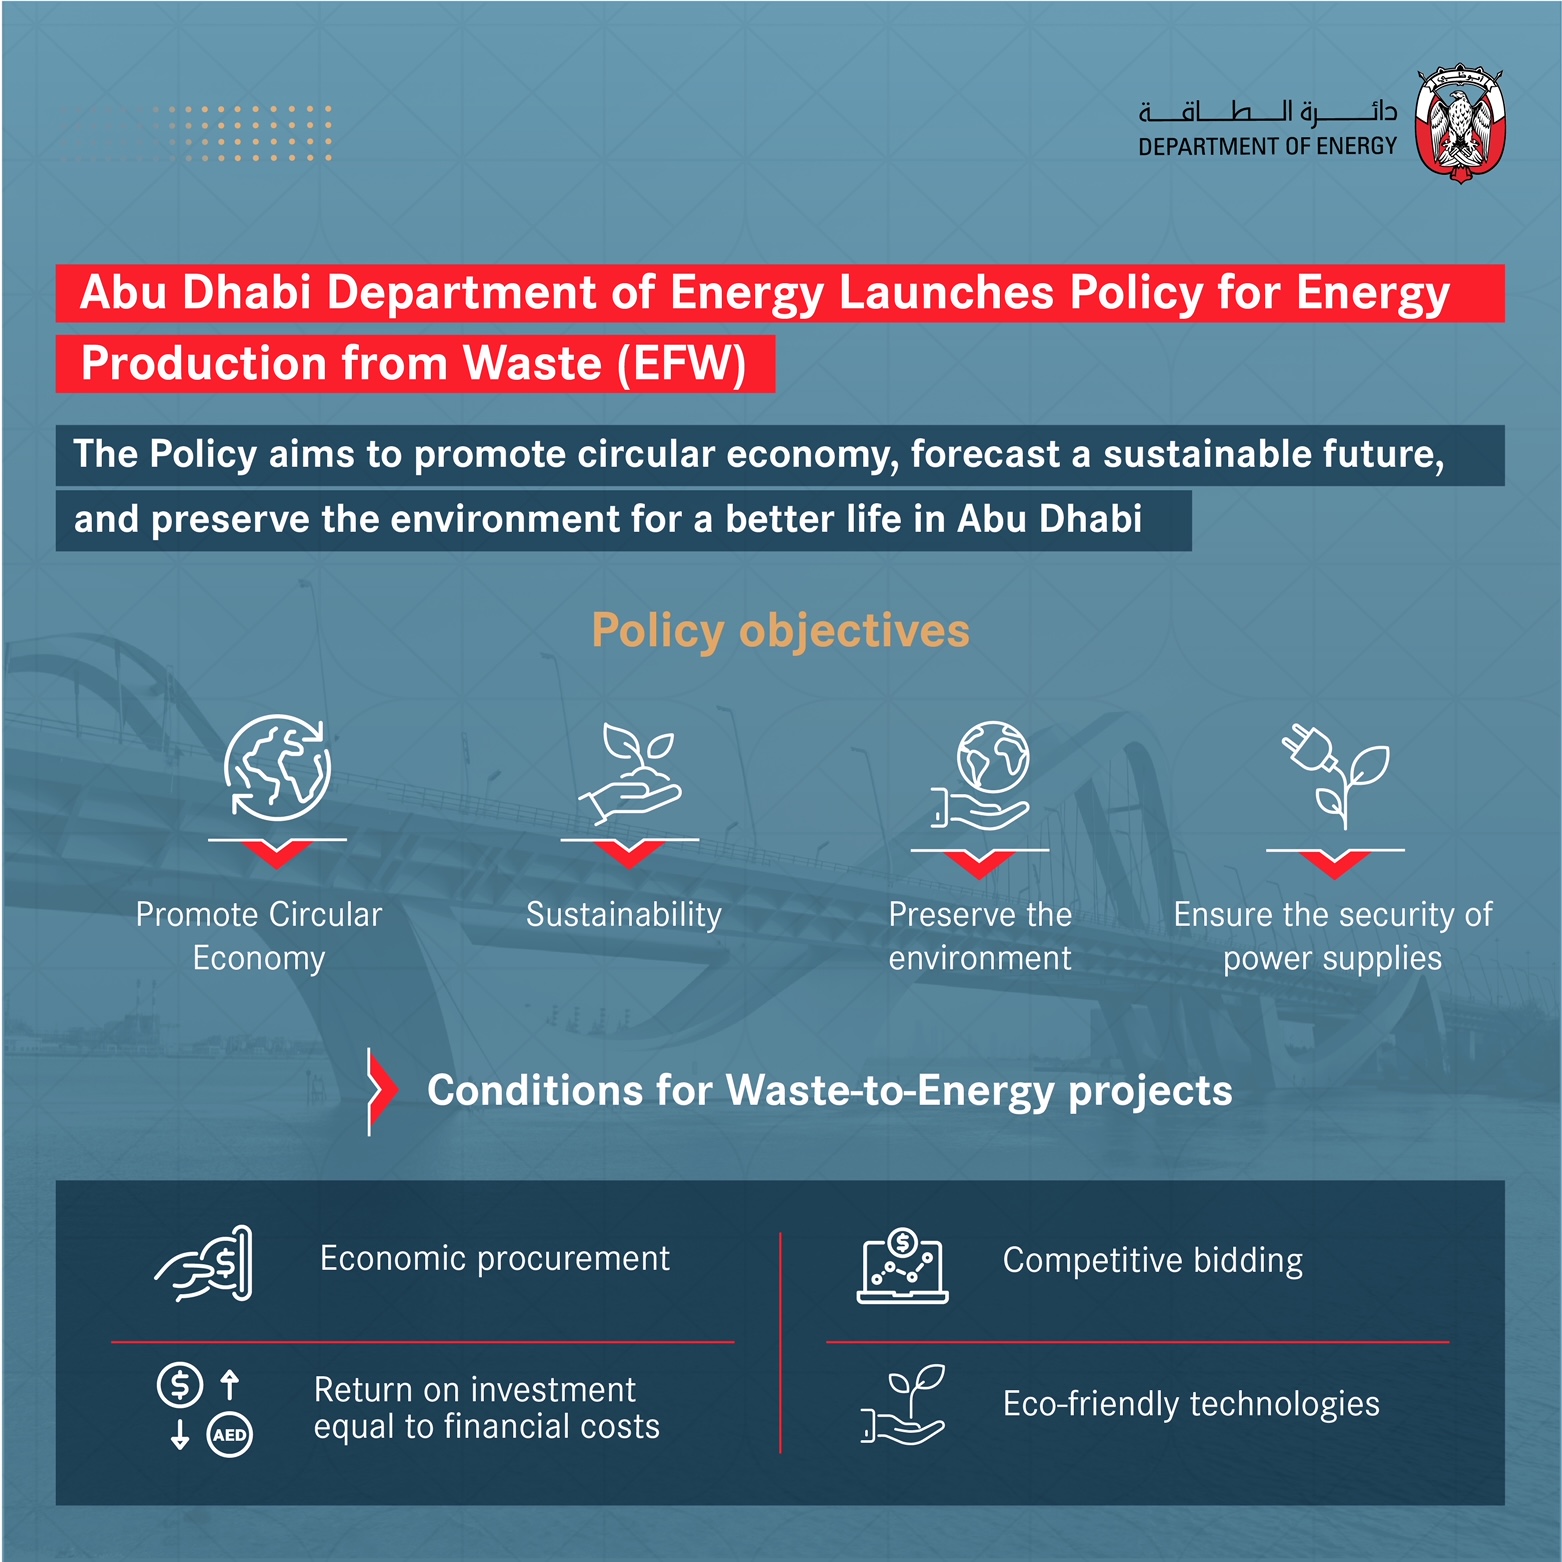 Abu Dhabi Department Of Energy Launches Policy For Energy Production From Waste (EFW)